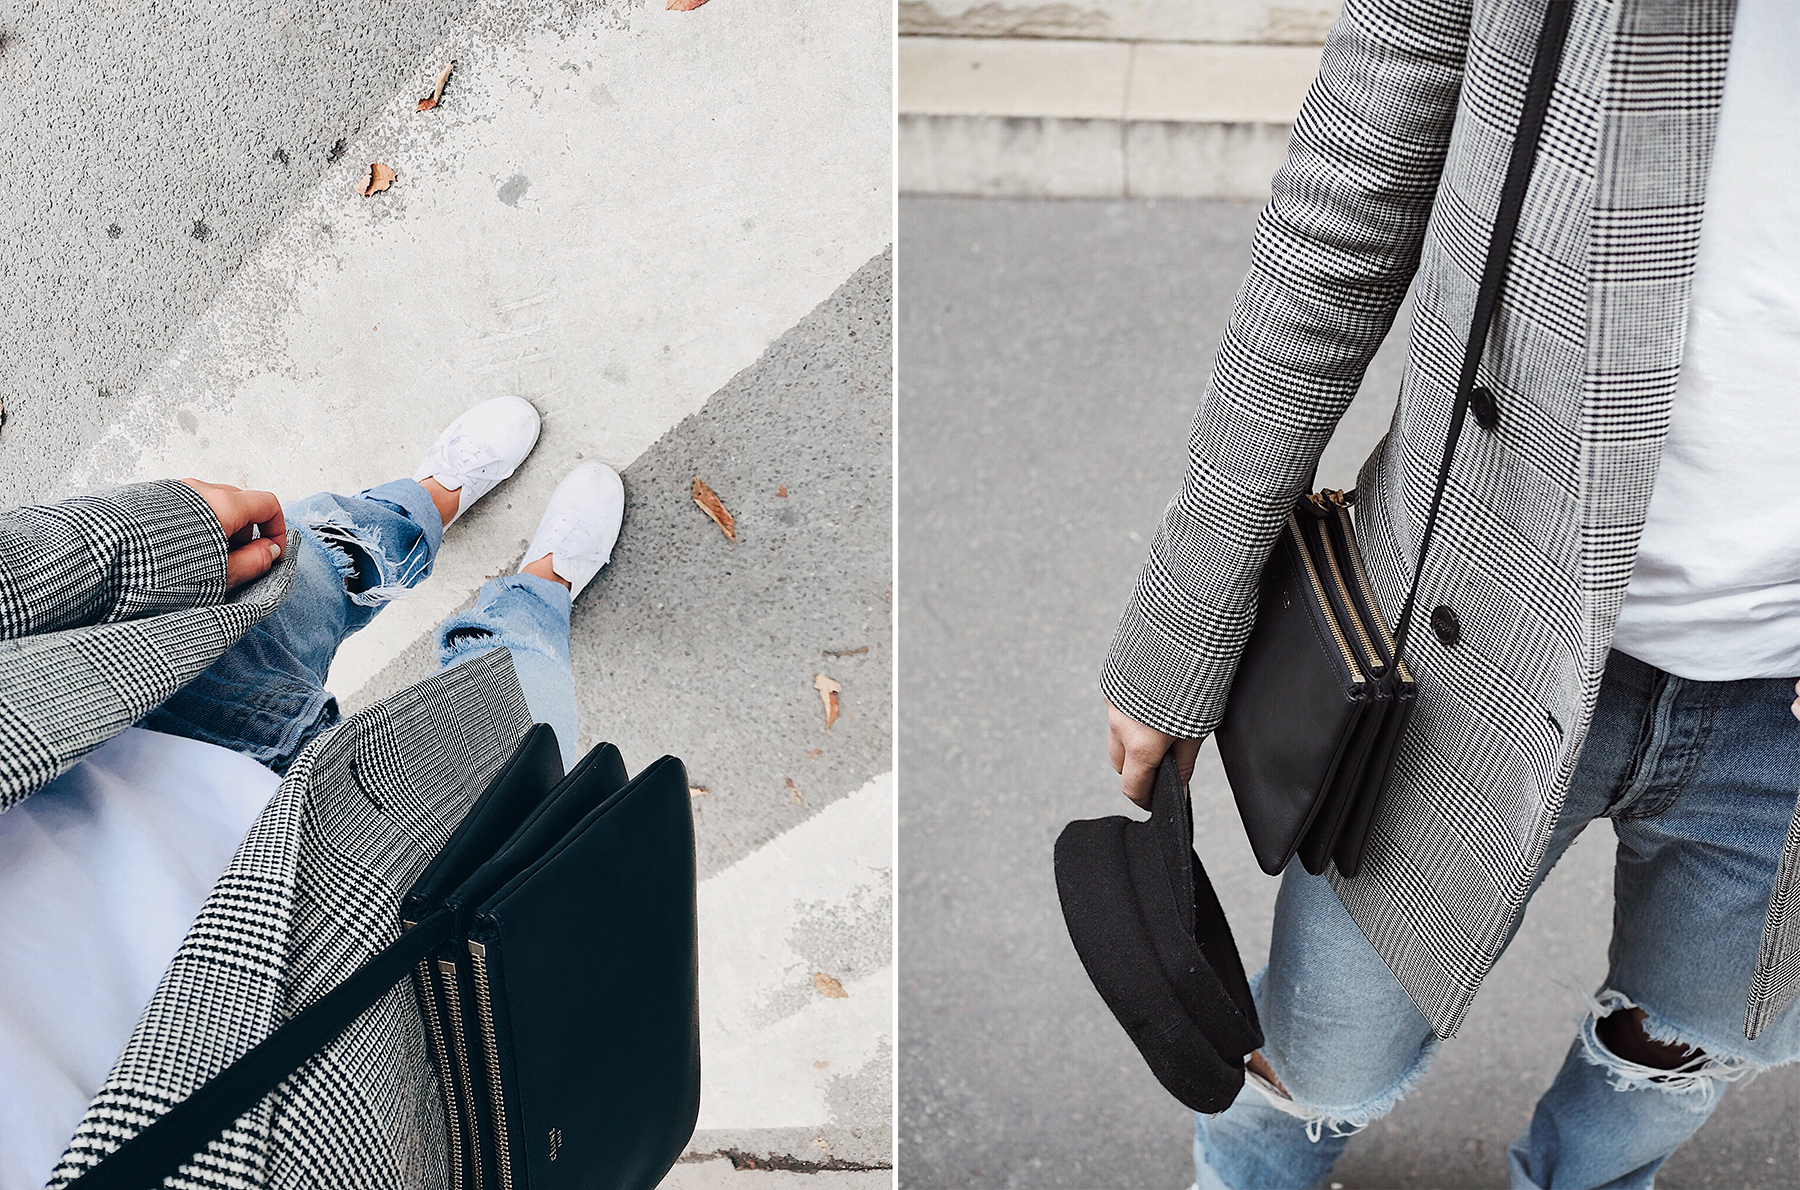 Steal Her Style: Parisian Casual Look | Love Daily Dose